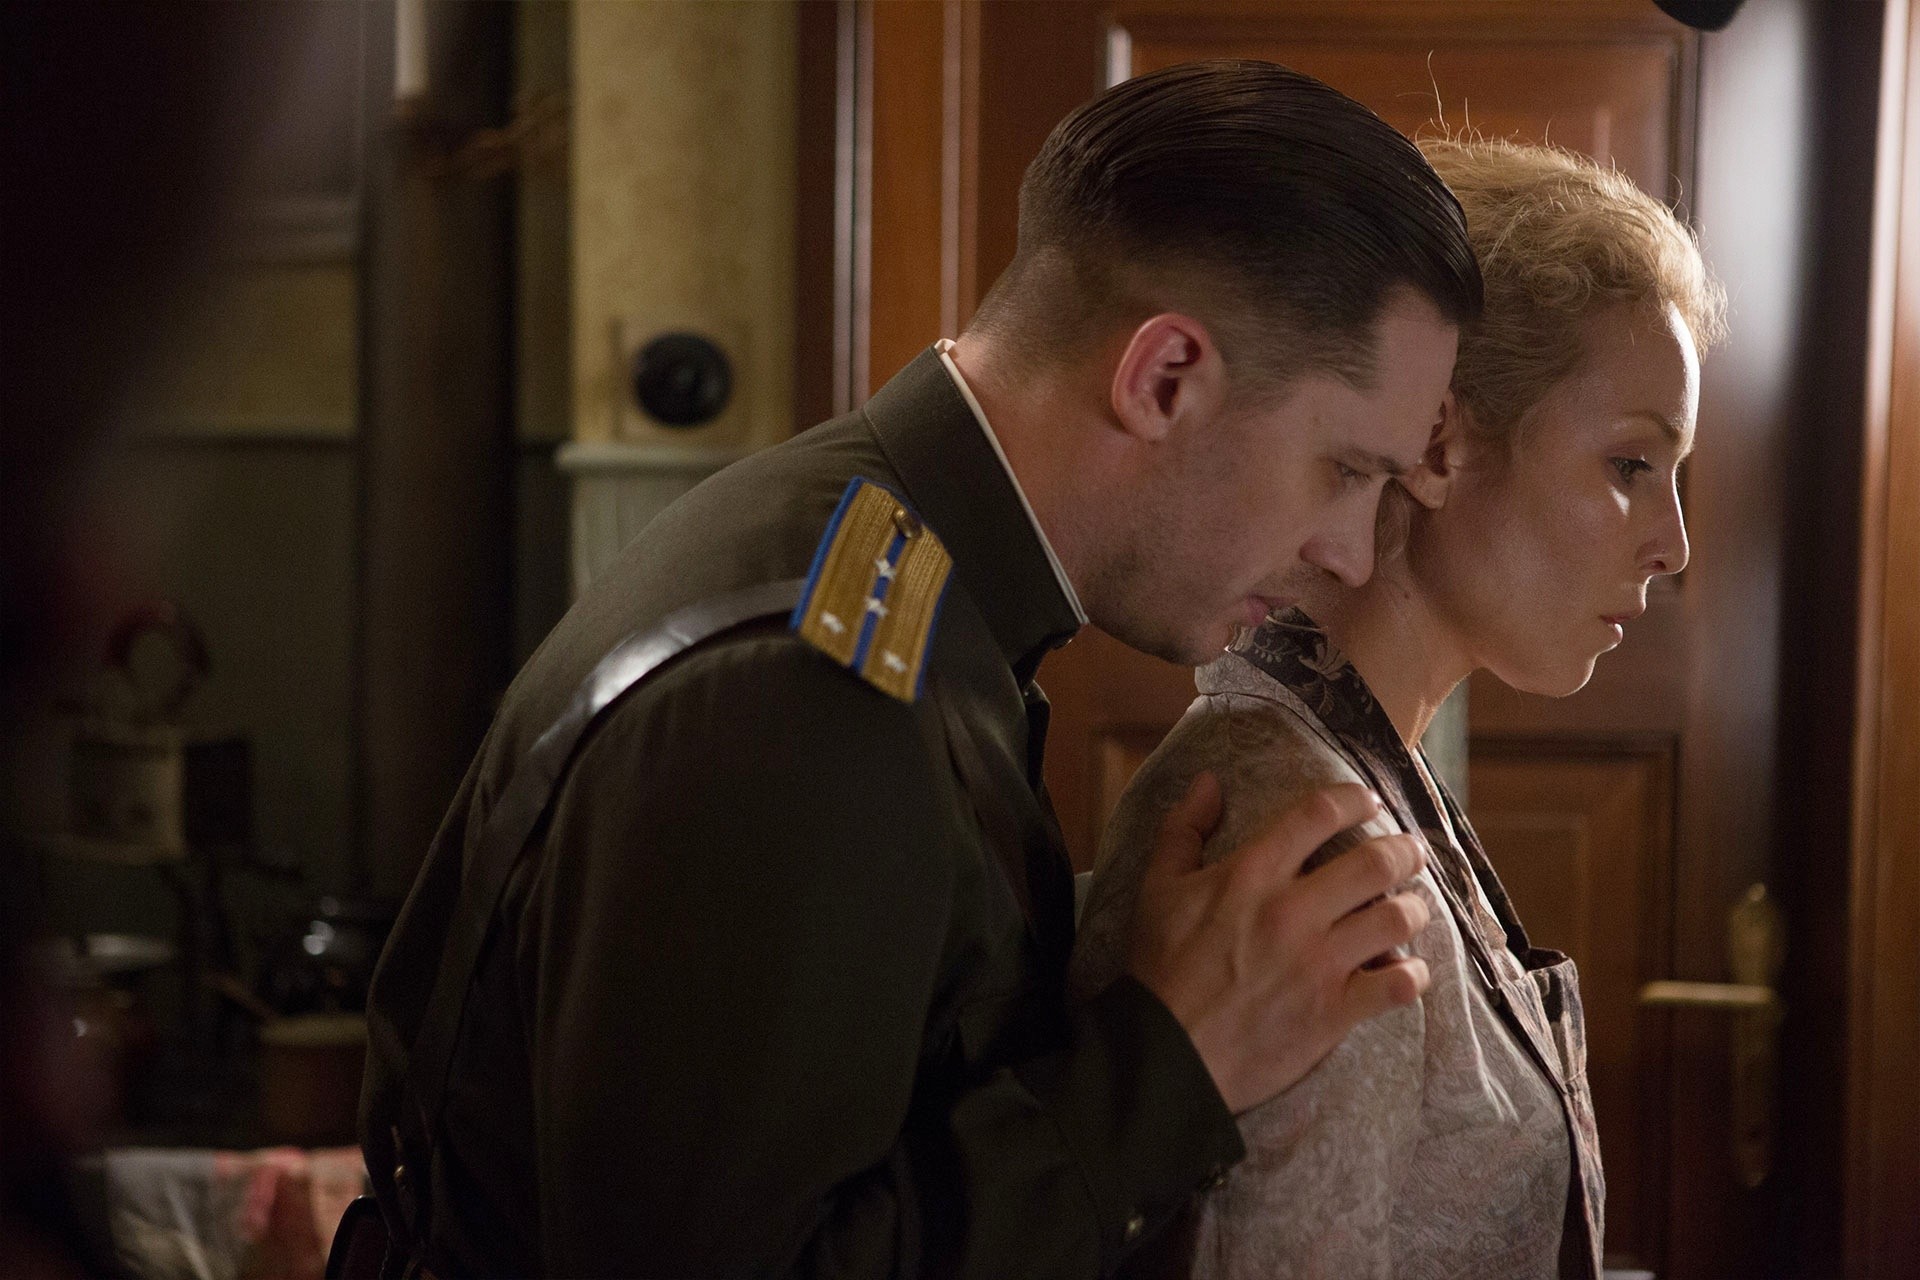 Tom Hardy stars as Leo Demidov and Noomi Rapace stars as Raisa Demidov in Summit Entertainment's Child 44 (2015). Photo credit by Larry Horricks.